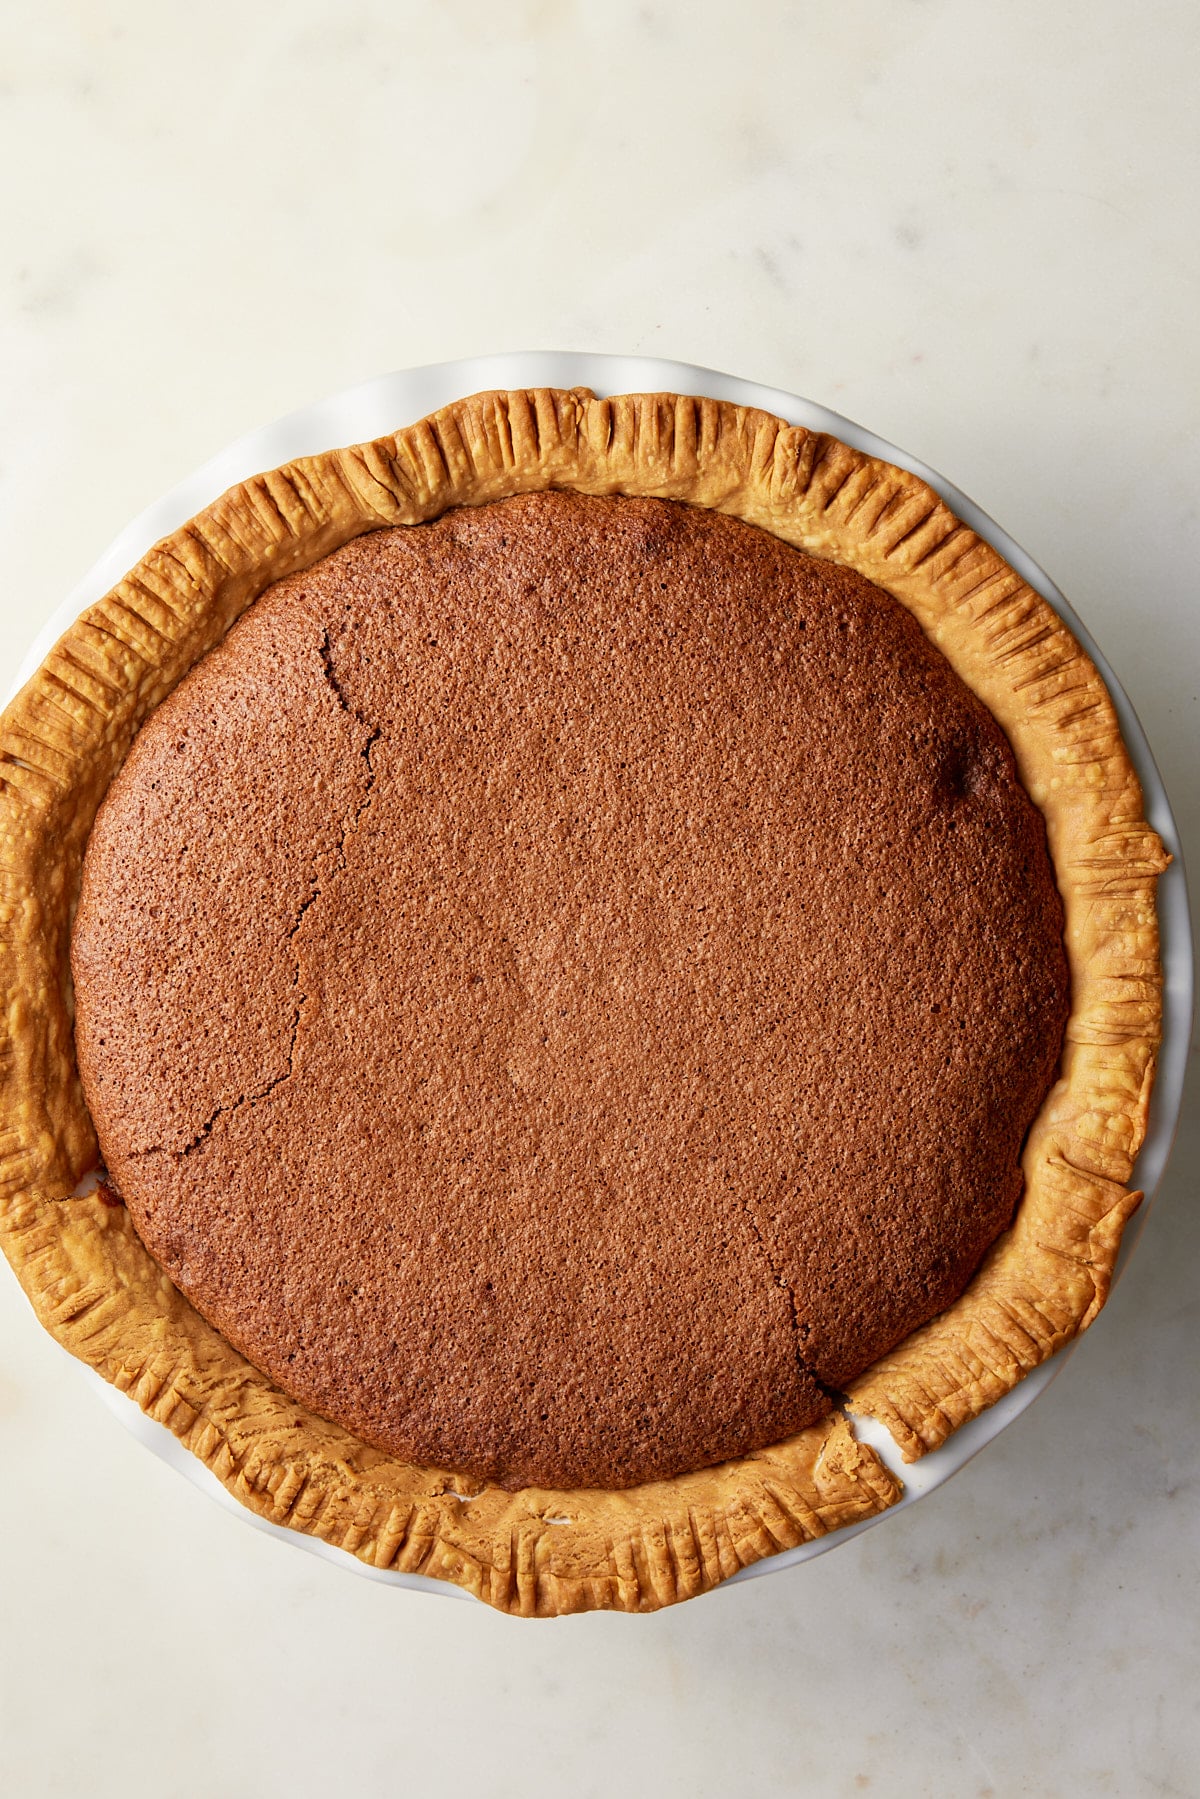 A baked chocolate chess pie